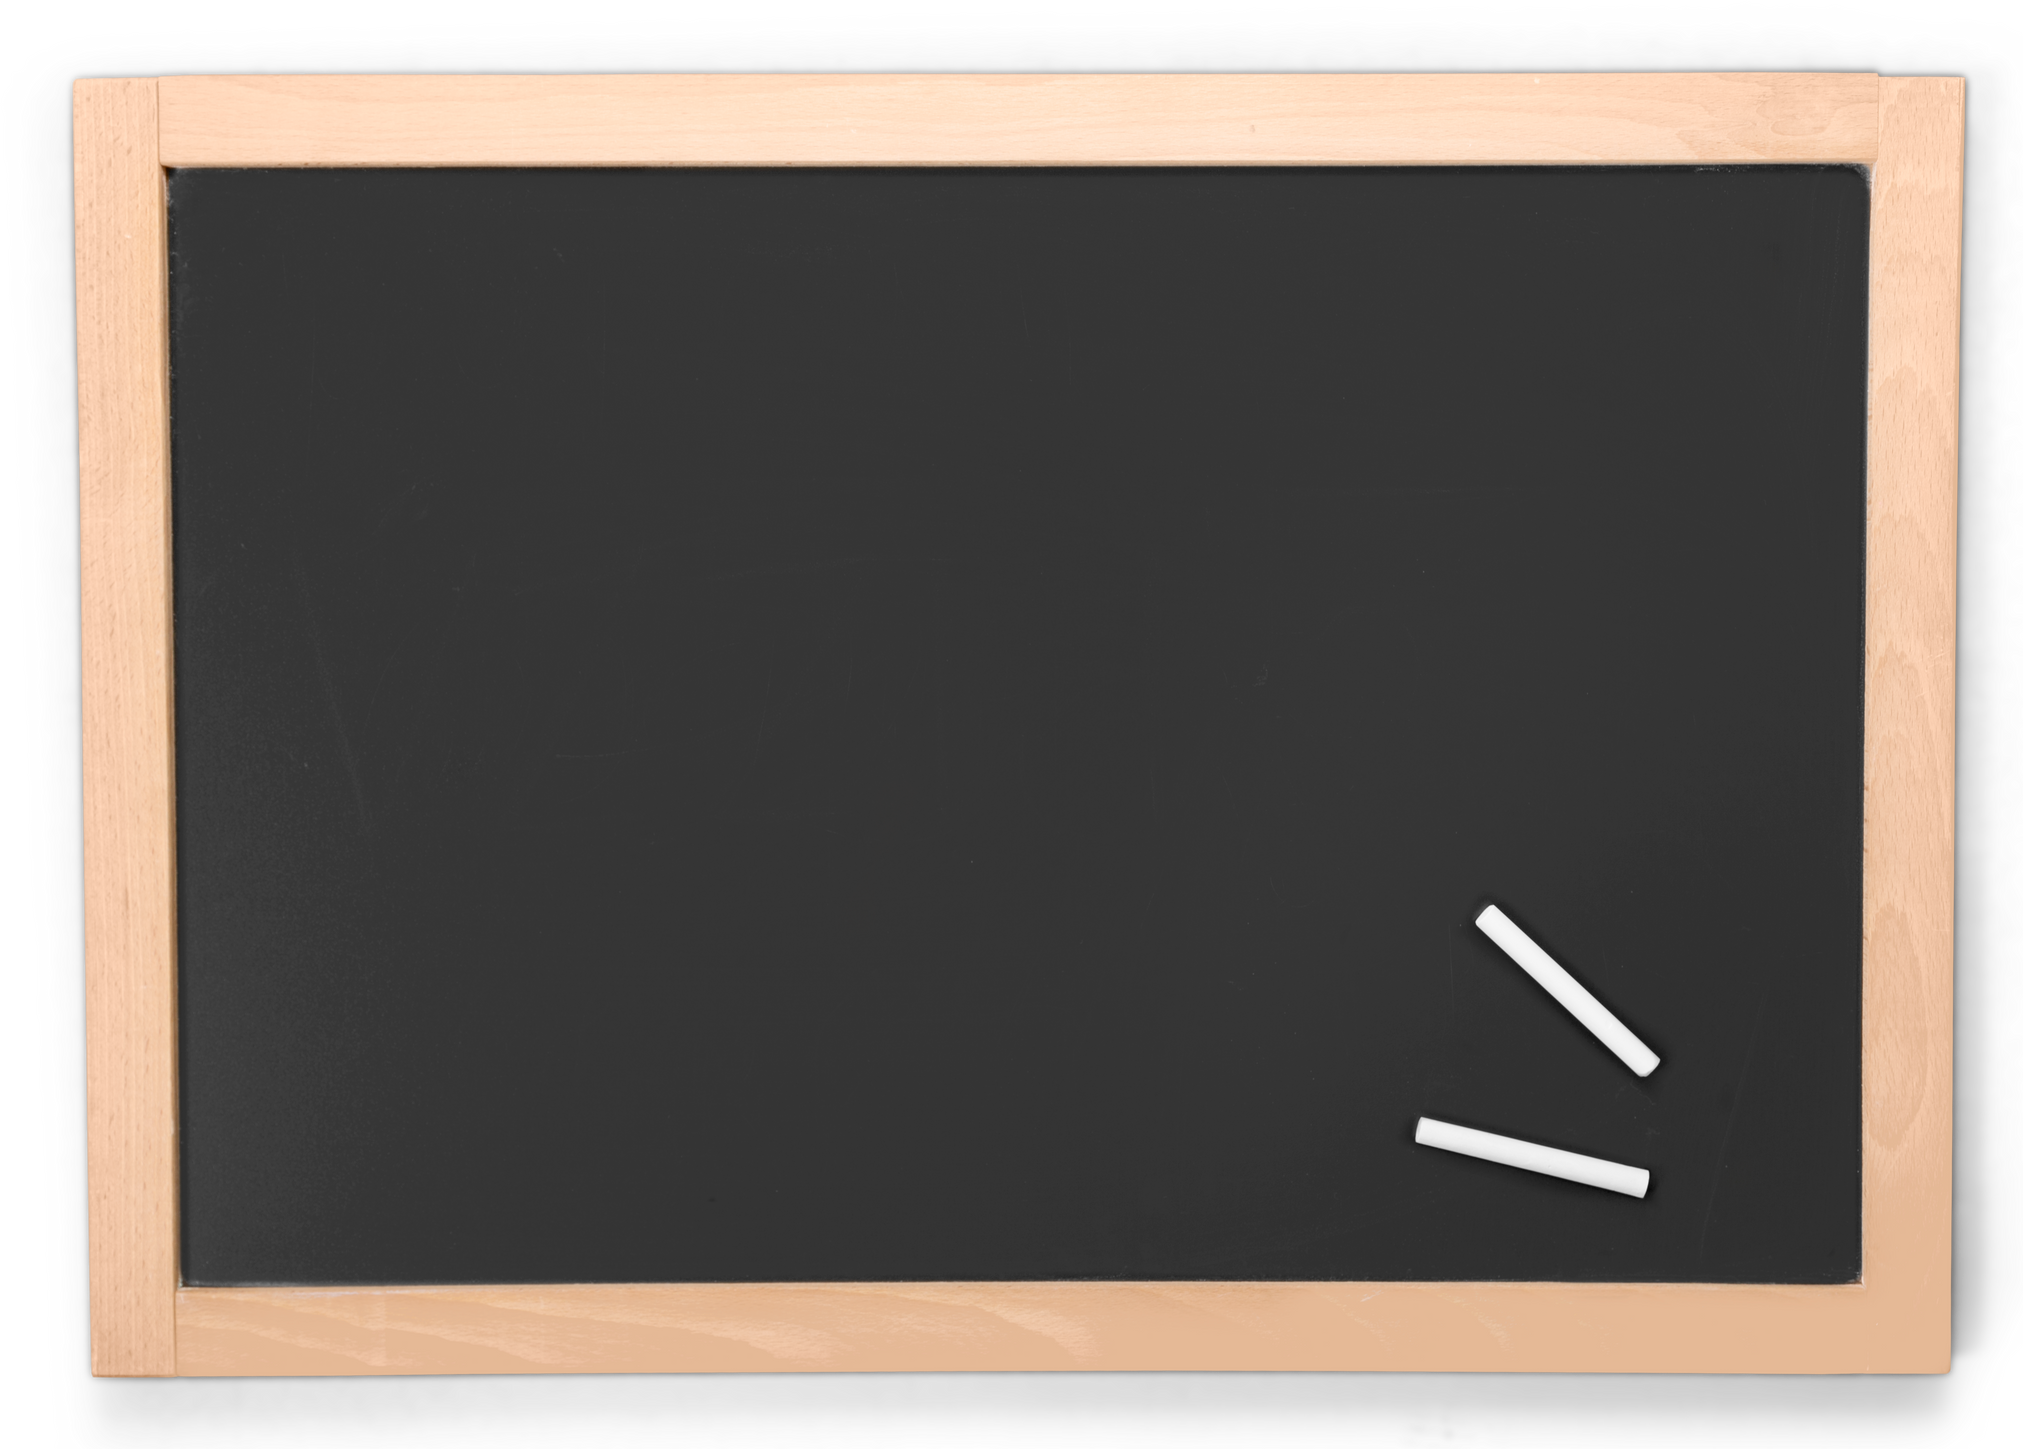 Blank Chalkboard with Space for a Text Message